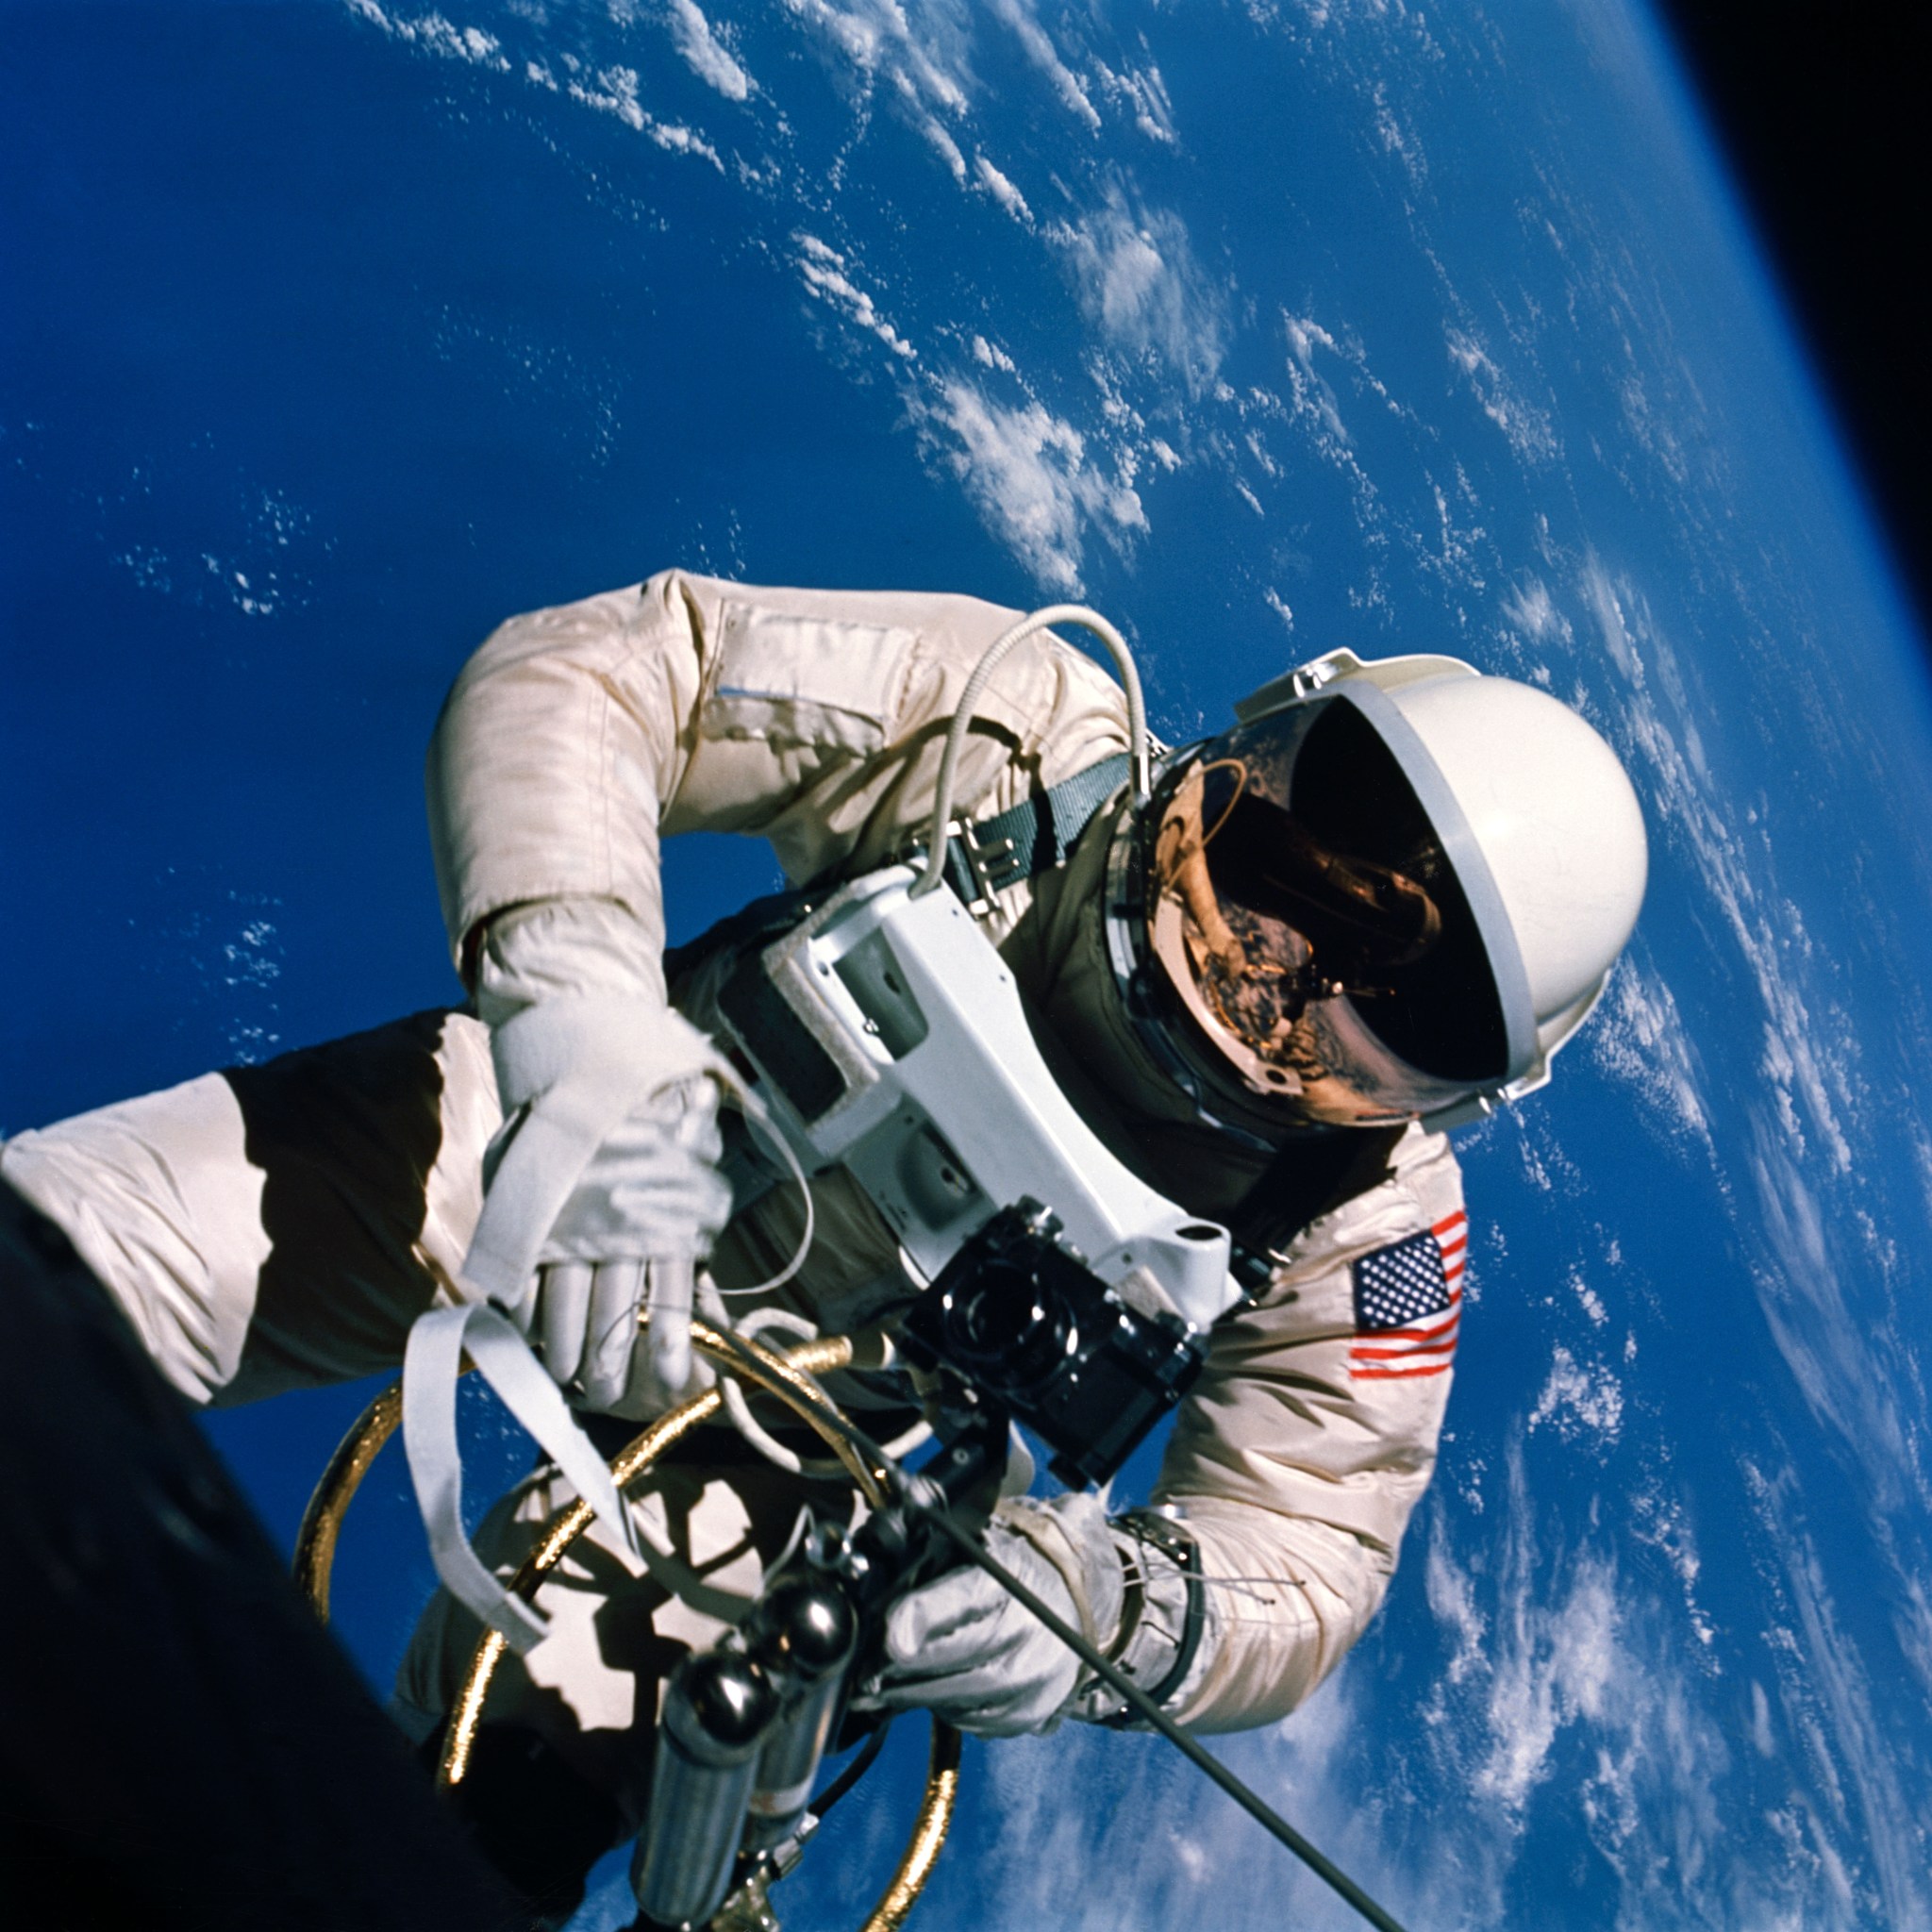 NASA Astronaut Ed White made history when he floated out of the hatch of his Gemini 4 capsule into the void of space.